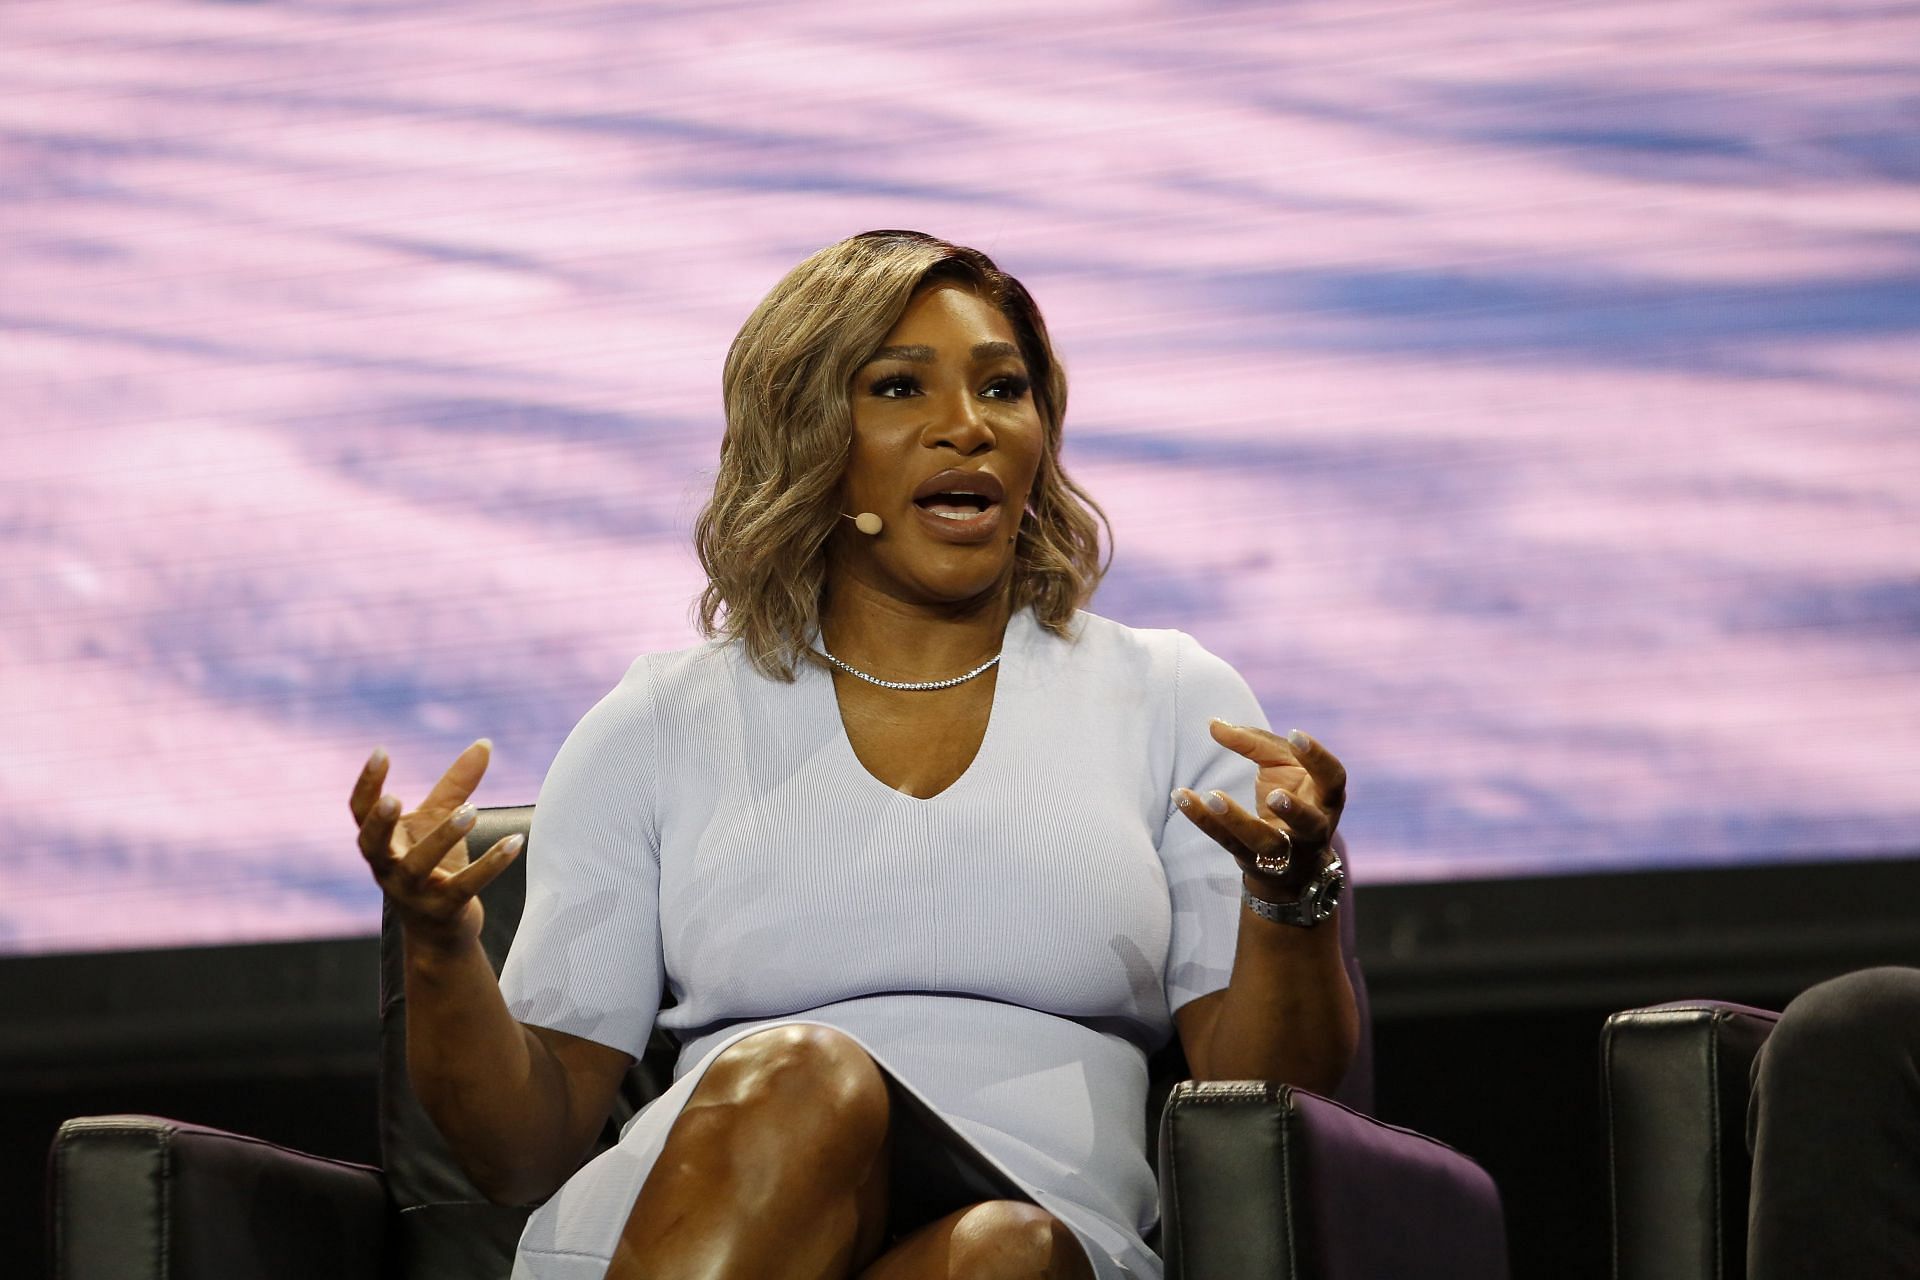 Serena Williams has been quite active in the business world lately